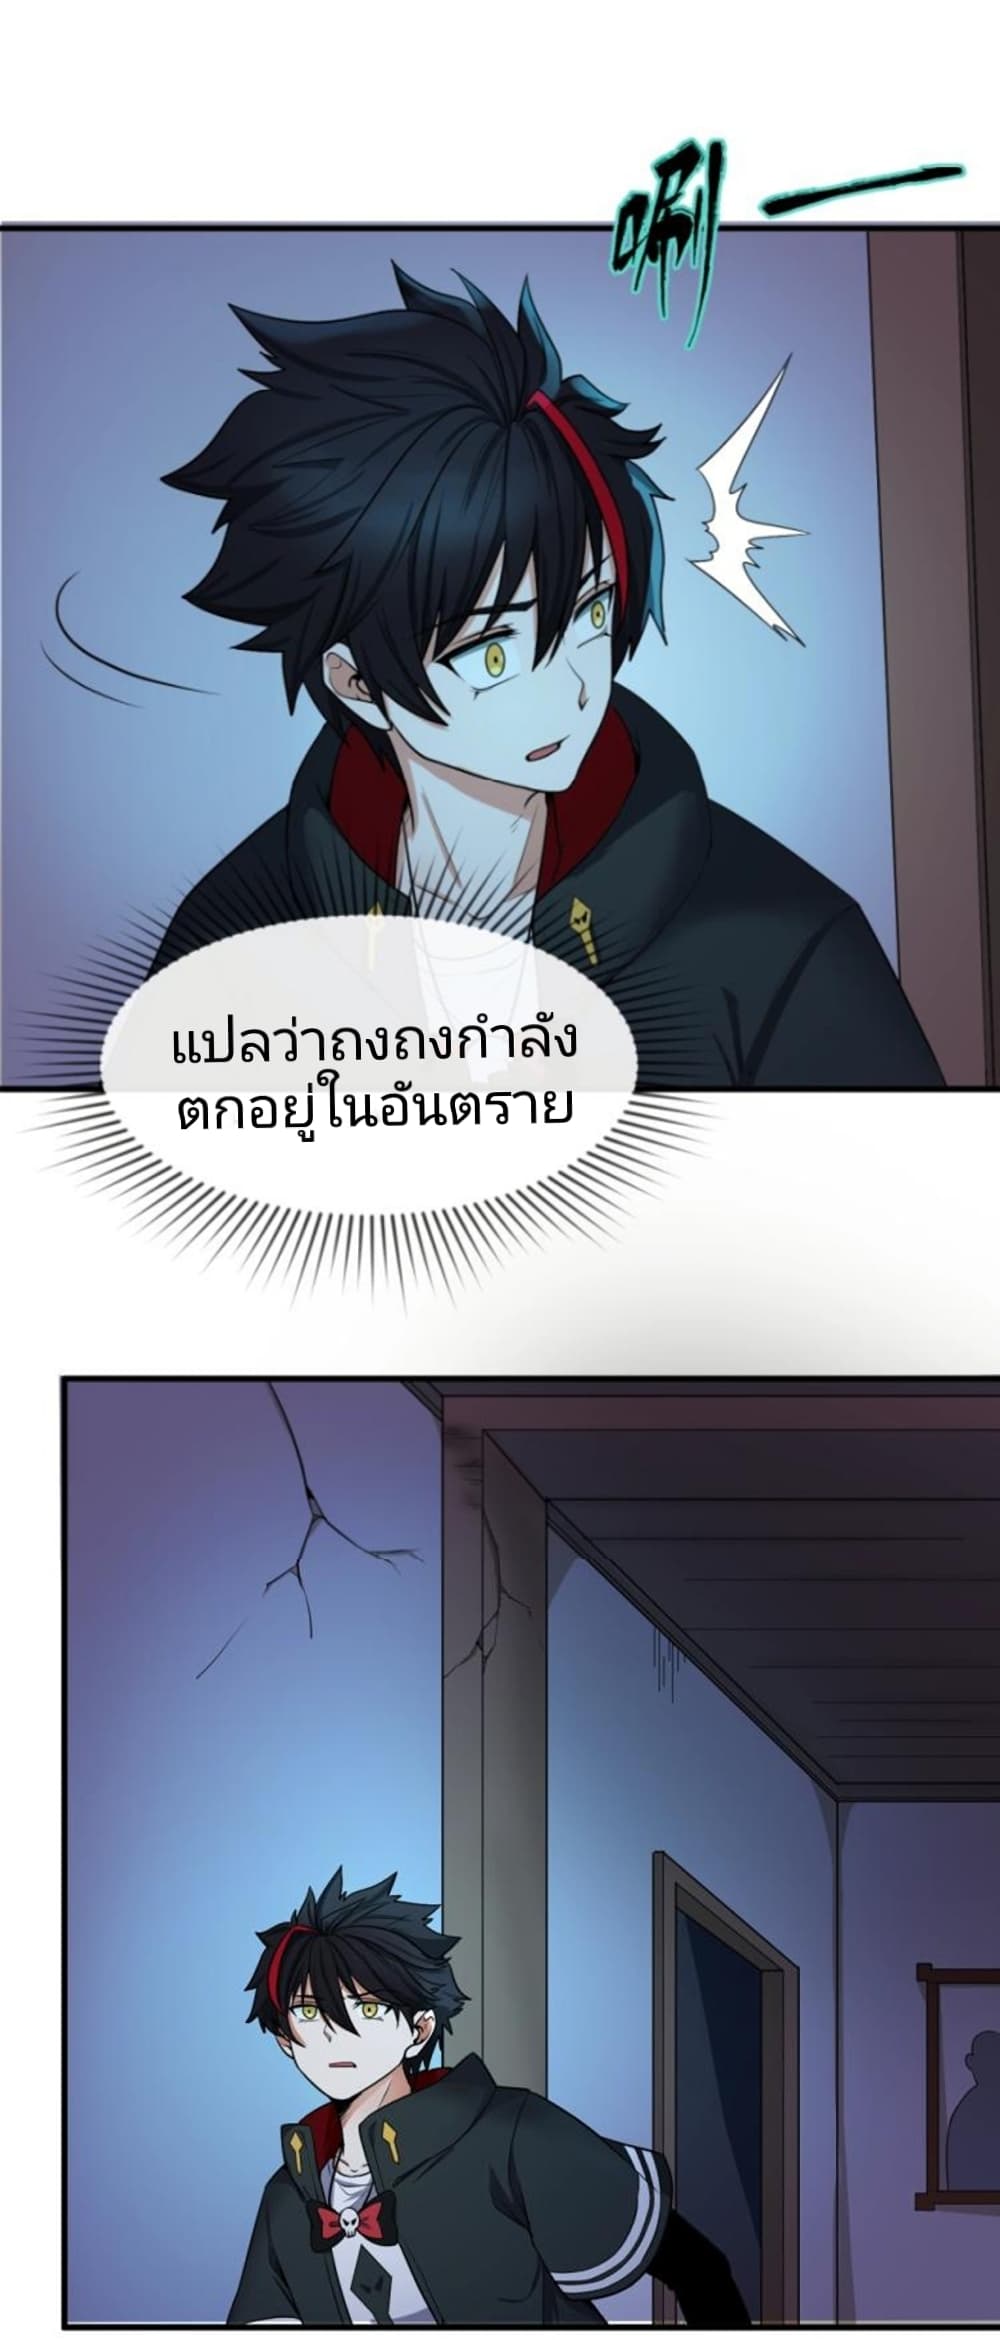 The Age of Ghost Spirits à¸à¸­à¸à¸à¸µà¹ 4 (24)